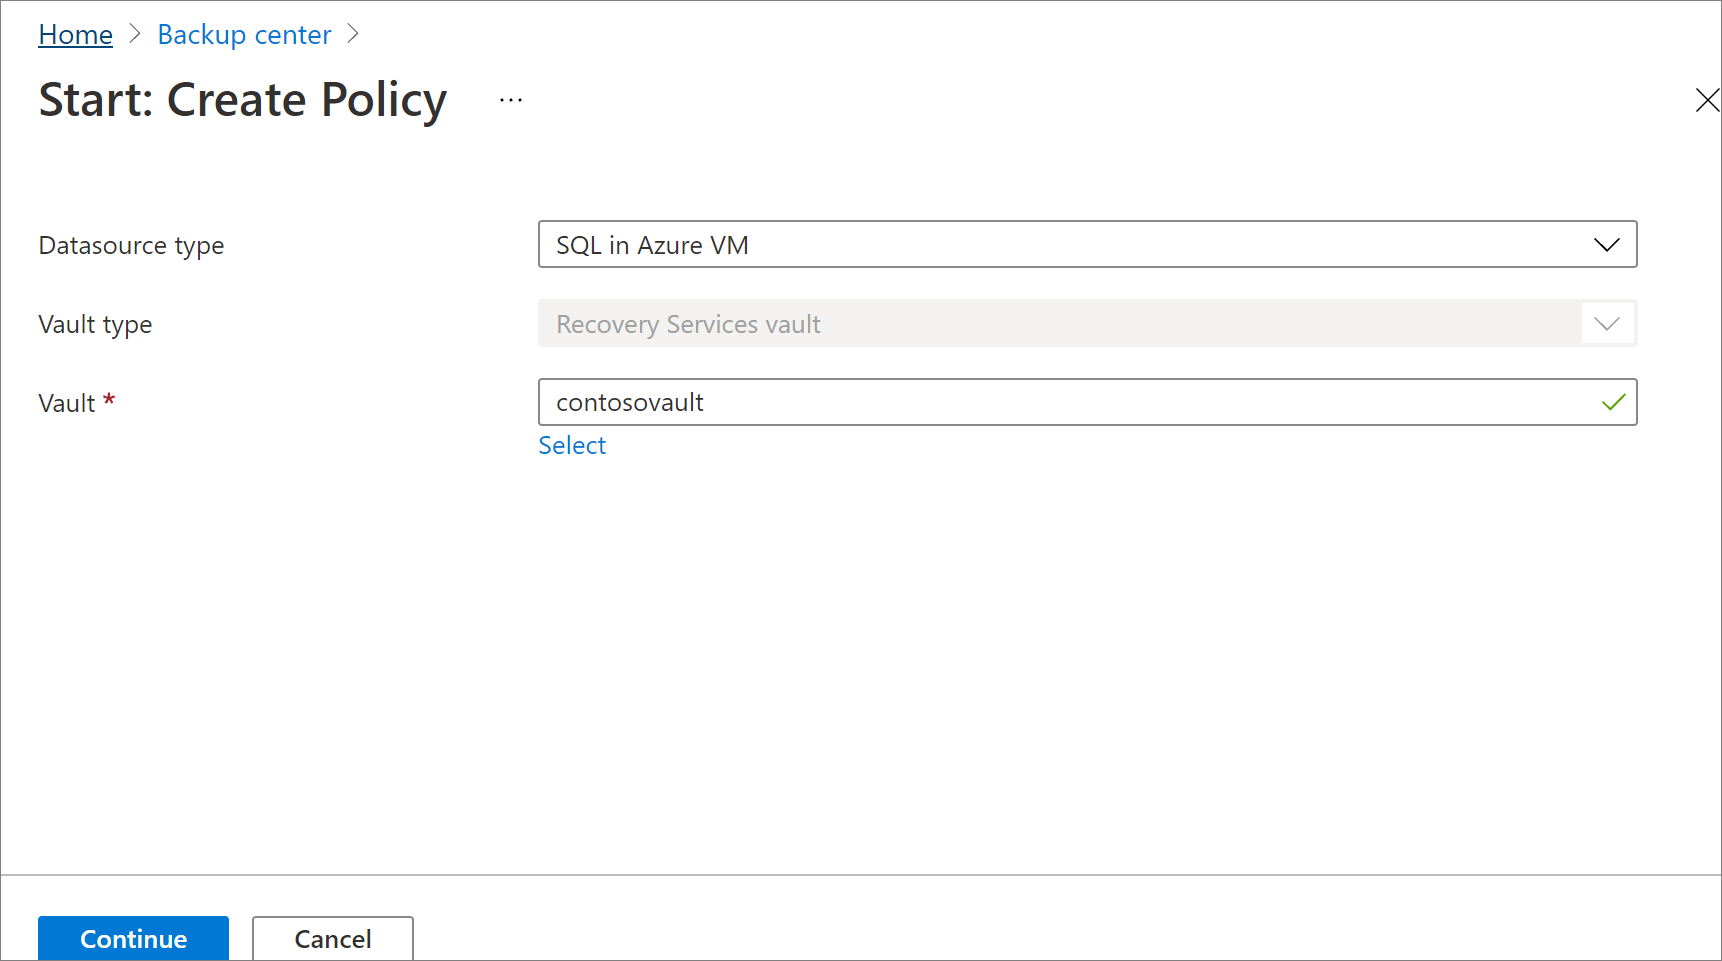 Screenshot showing to choose a policy type for the new backup policy.